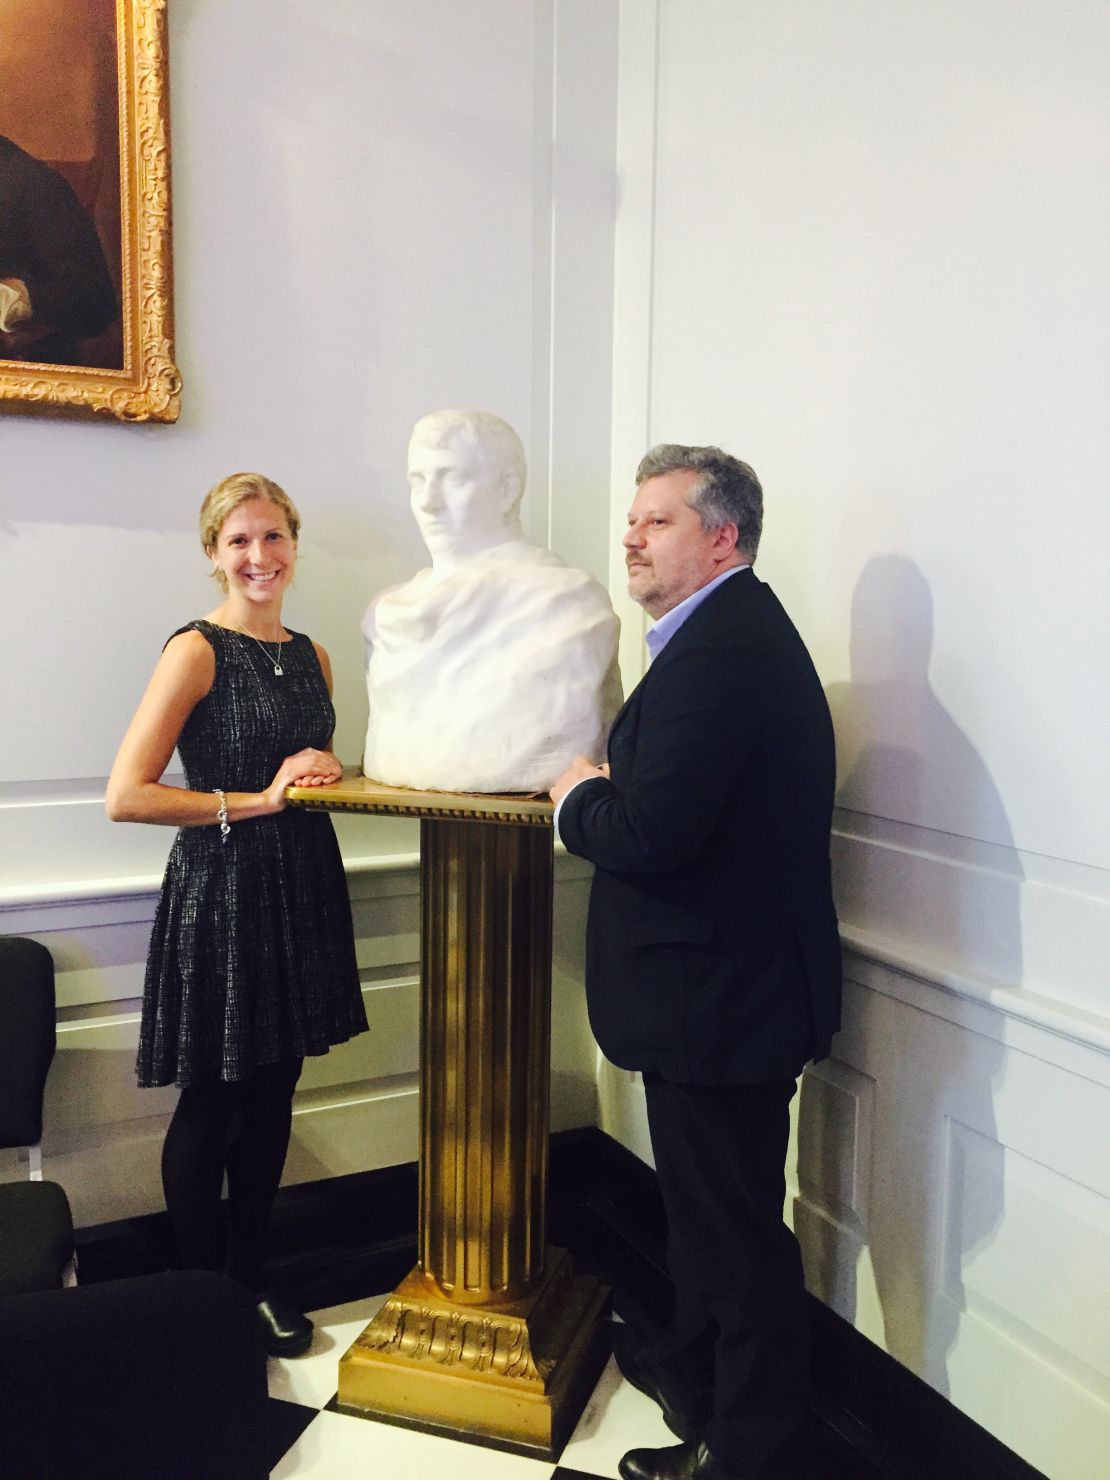 Rodin expert Jerome Le Blay, who authenticated the bust, poses with Mallory Mortillaro, who discovered its famous past.